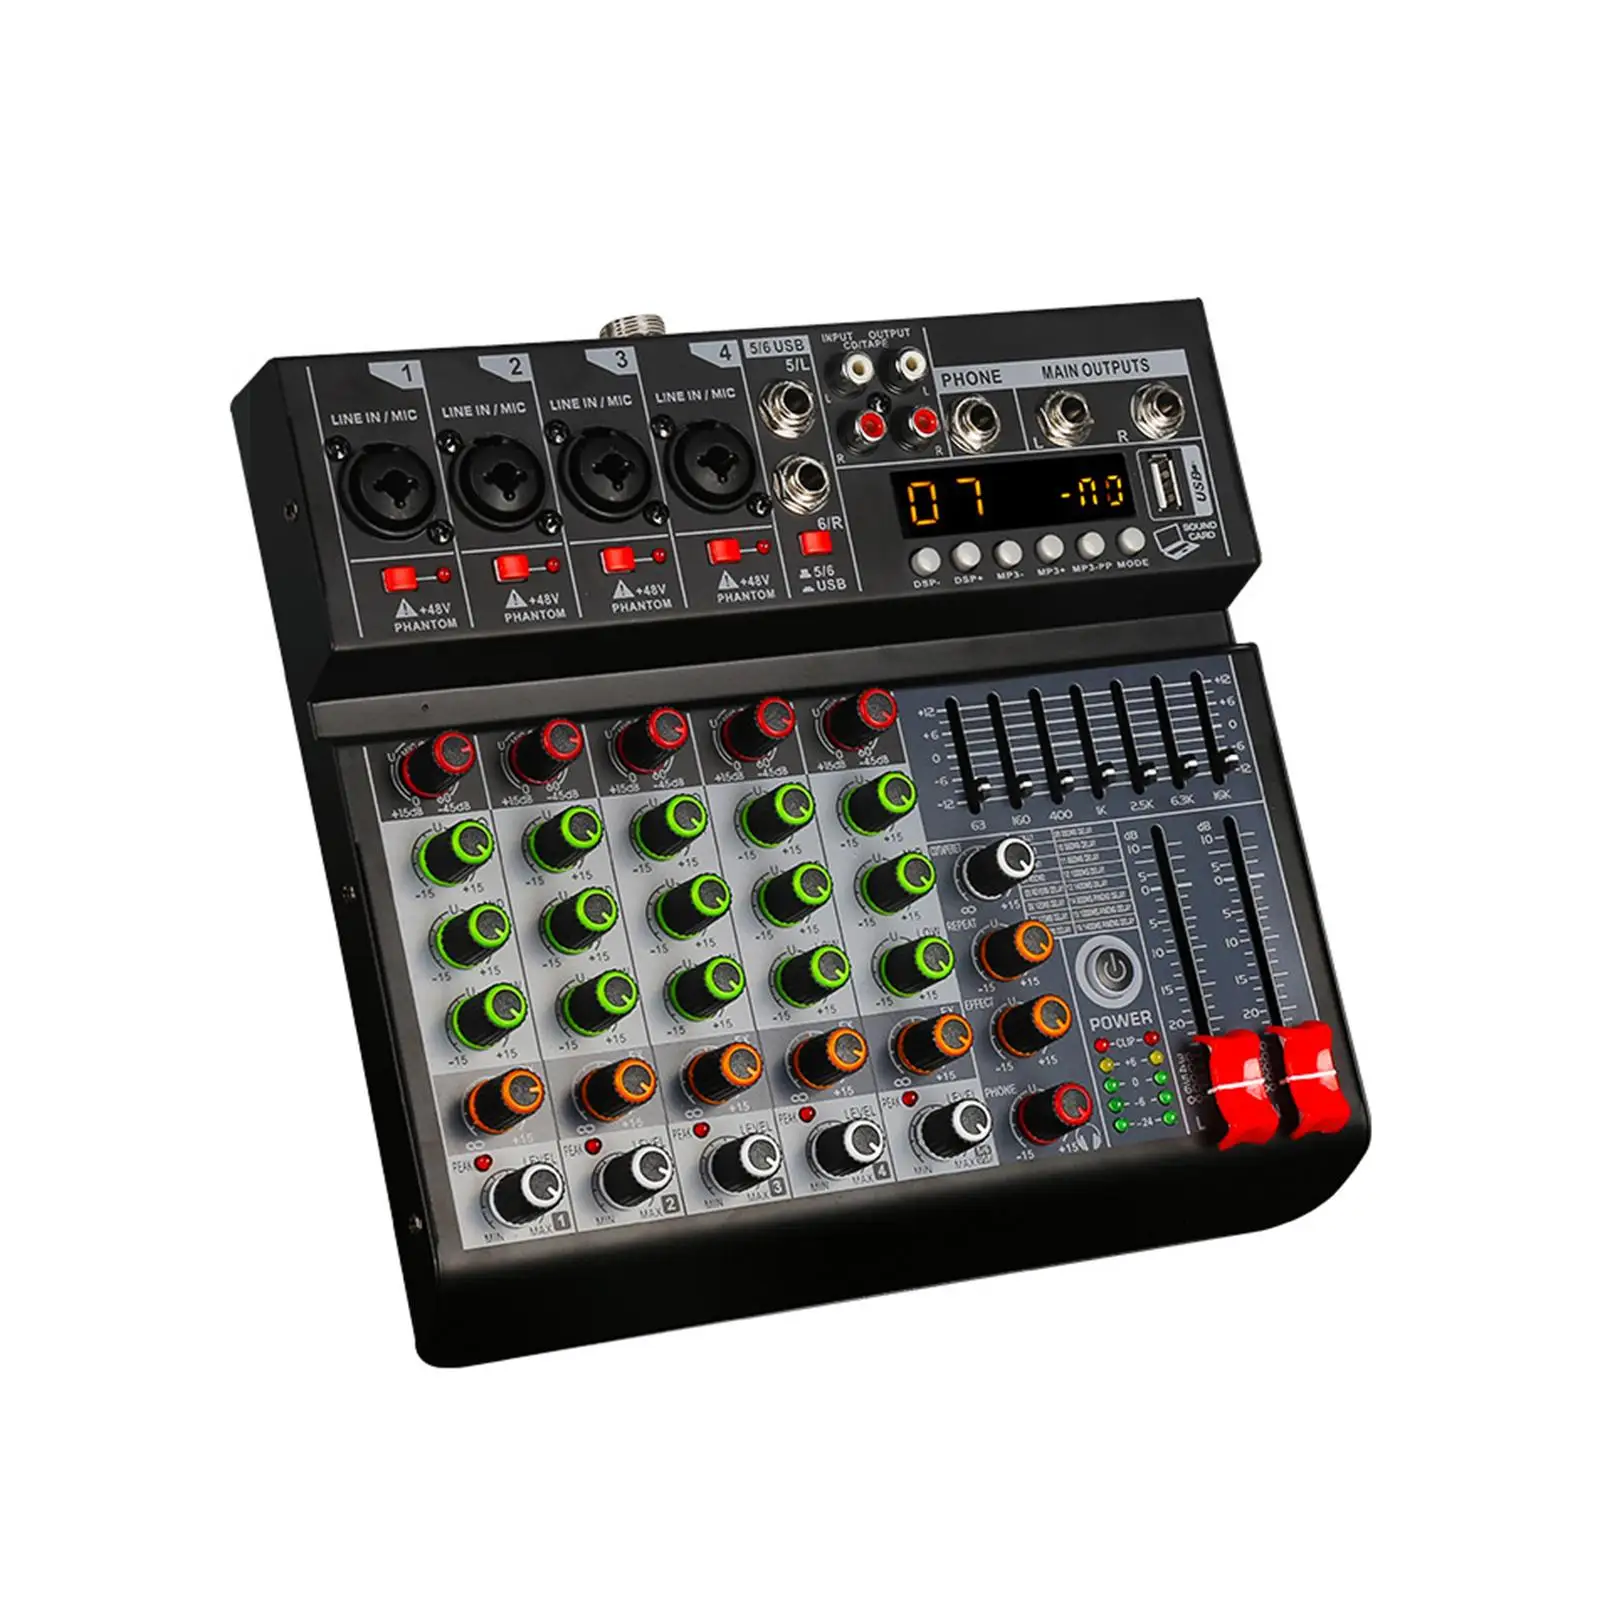 

6 Channel Audio Mixer Digital Processor Portable Sound Mixing Console for PC Family KTV Campus Speech Meeting Recording DJ Stage